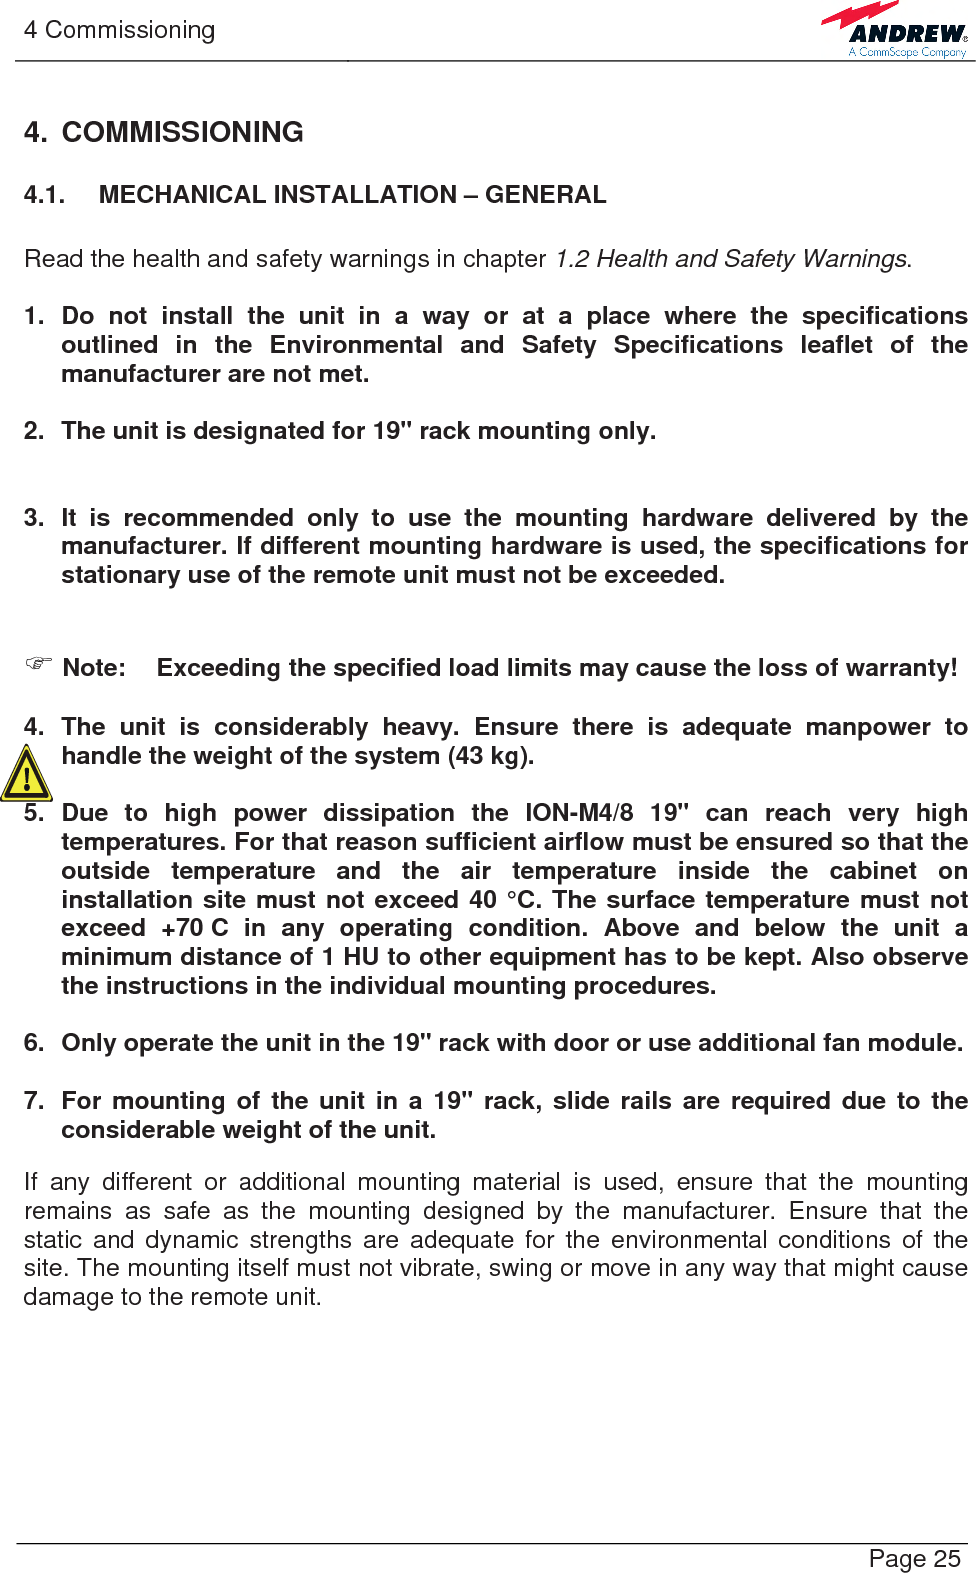 4 Commissioning   Page 25 4. COMMISSIONING 4.1.  MECHANICAL INSTALLATION – GENERAL  Read the health and safety warnings in chapter 1.2 Health and Safety Warnings.  1. Do not install the unit in a way or at a place where the specifications outlined in the Environmental and Safety Specifications leaflet of the manufacturer are not met.  2.  The unit is designated for 19&quot; rack mounting only.   3. It is recommended only to use the mounting hardware delivered by the manufacturer. If different mounting hardware is used, the specifications for stationary use of the remote unit must not be exceeded.   ) Note:  Exceeding the specified load limits may cause the loss of warranty!  4. The unit is considerably heavy. Ensure there is adequate manpower to handle the weight of the system (43 kg).  5. Due to high power dissipation the ION-M4/8 19&quot; can reach very high temperatures. For that reason sufficient airflow must be ensured so that the outside temperature and the air temperature inside the cabinet on installation site must not exceed 40 °C. The surface temperature must not exceed +70 C in any operating condition. Above and below the unit a minimum distance of 1 HU to other equipment has to be kept. Also observe the instructions in the individual mounting procedures.  6.  Only operate the unit in the 19&quot; rack with door or use additional fan module.  7.  For mounting of the unit in a 19&quot; rack, slide rails are required due to the considerable weight of the unit.   If any different or additional mounting material is used, ensure that the mounting remains as safe as the mounting designed by the manufacturer. Ensure that the static and dynamic strengths are adequate for the environmental conditions of the site. The mounting itself must not vibrate, swing or move in any way that might cause damage to the remote unit.   